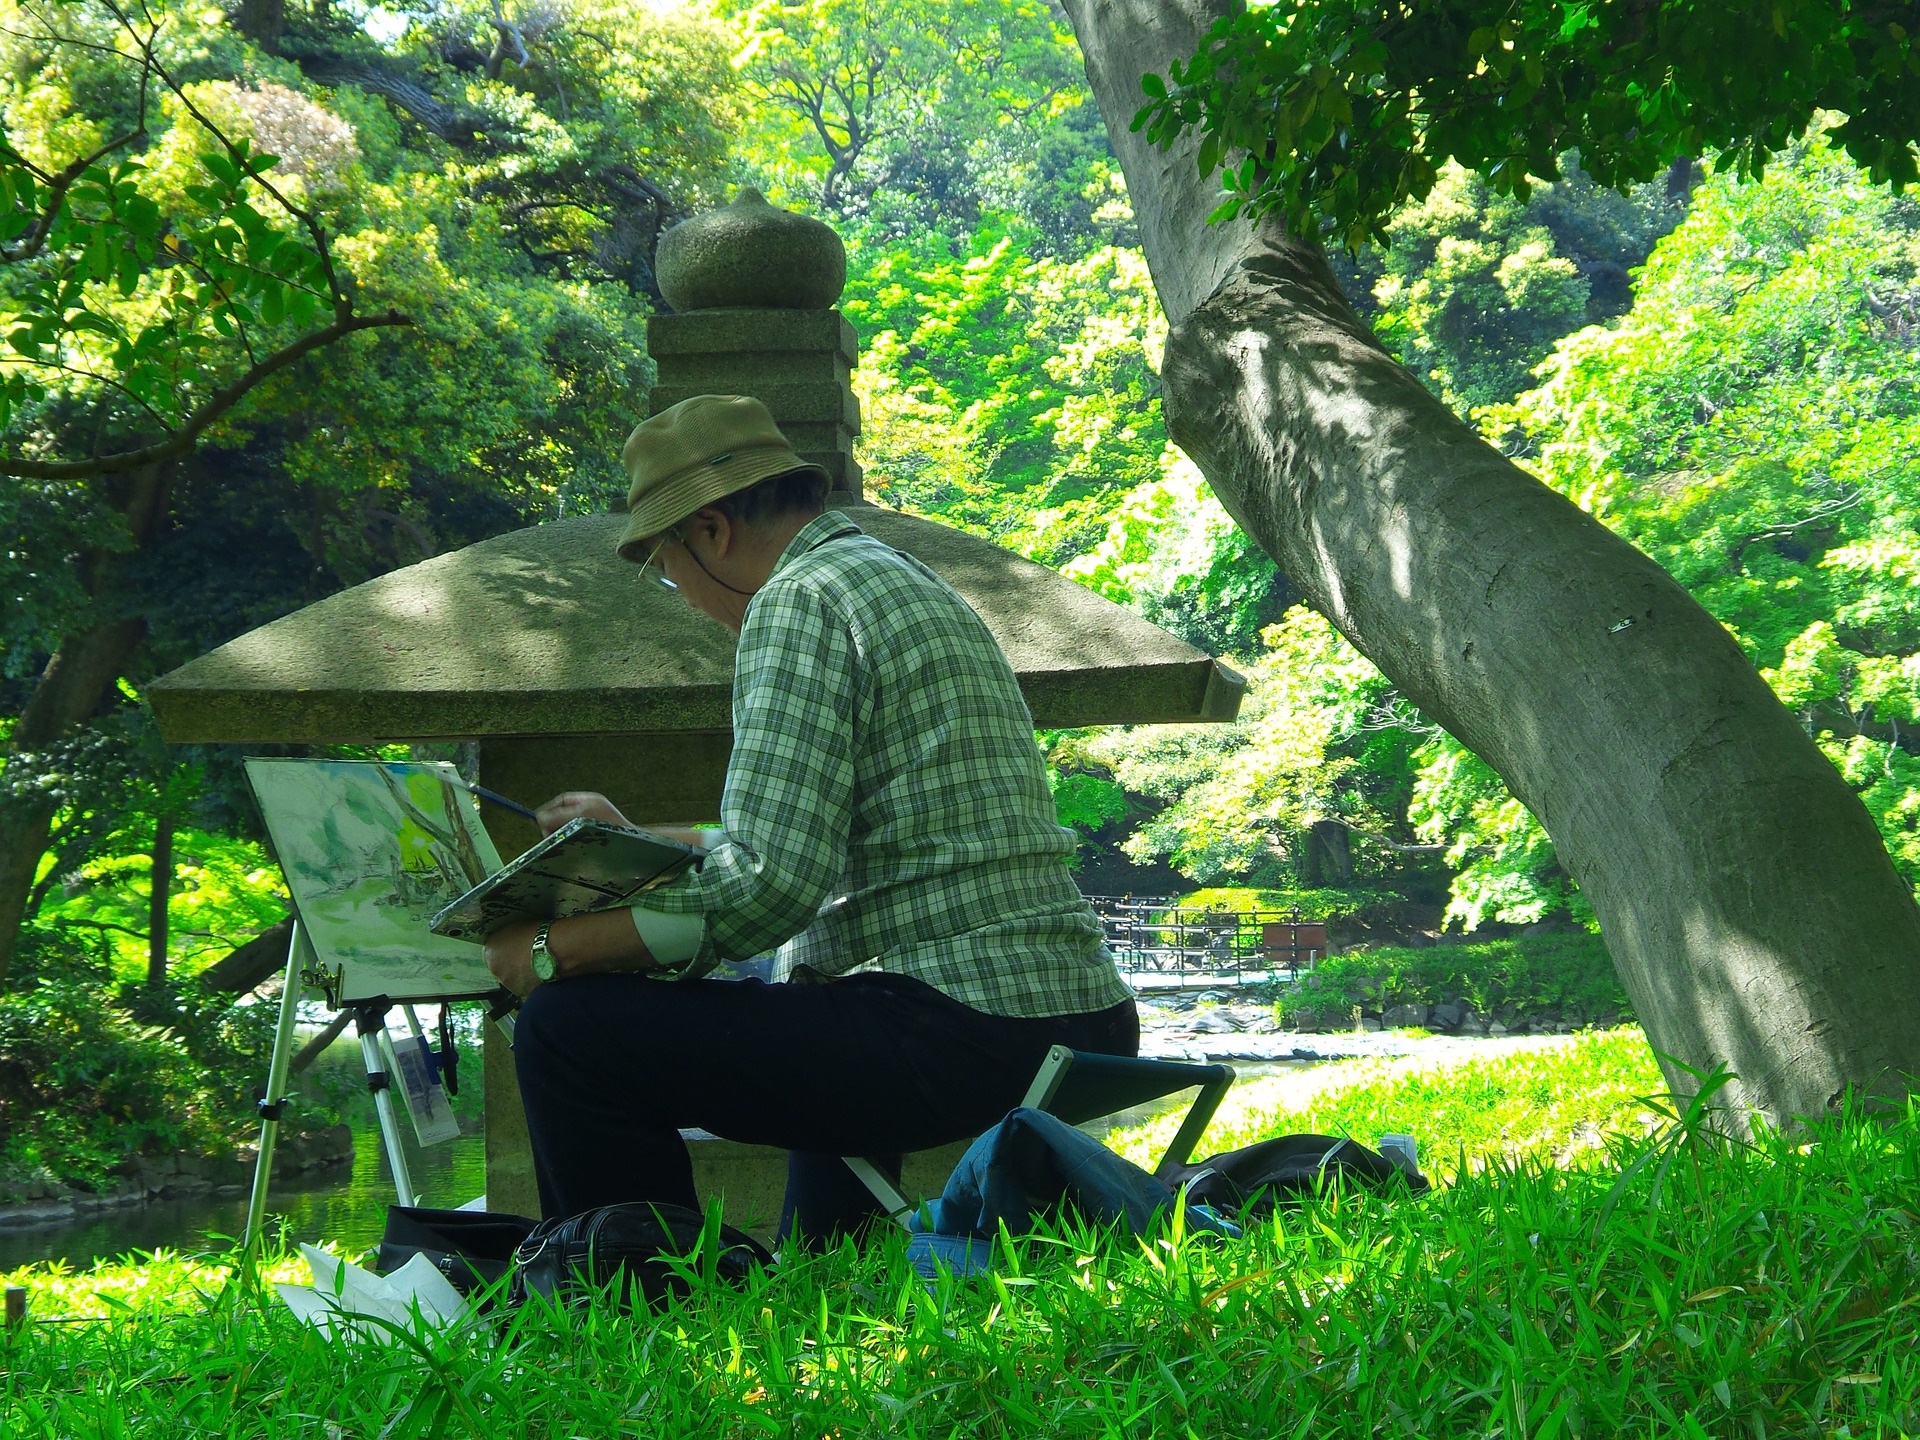 Artist perched under the shade of green trees Painting the Landscape